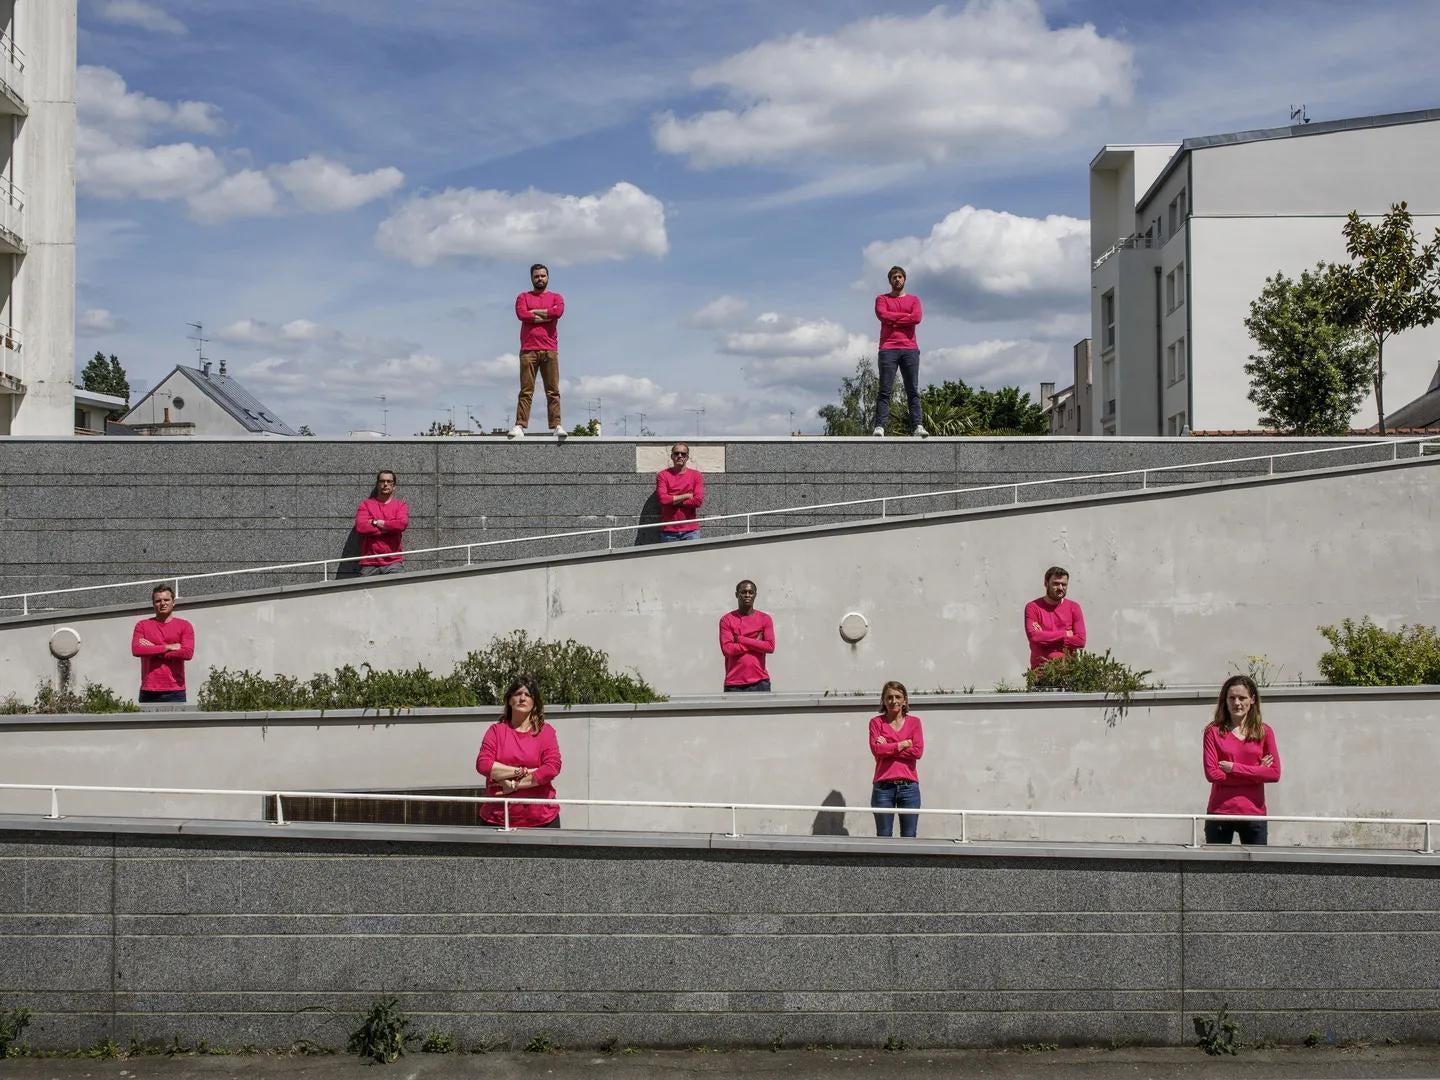 Ten people in matching pink tops stand apart in a lined formation along stairs